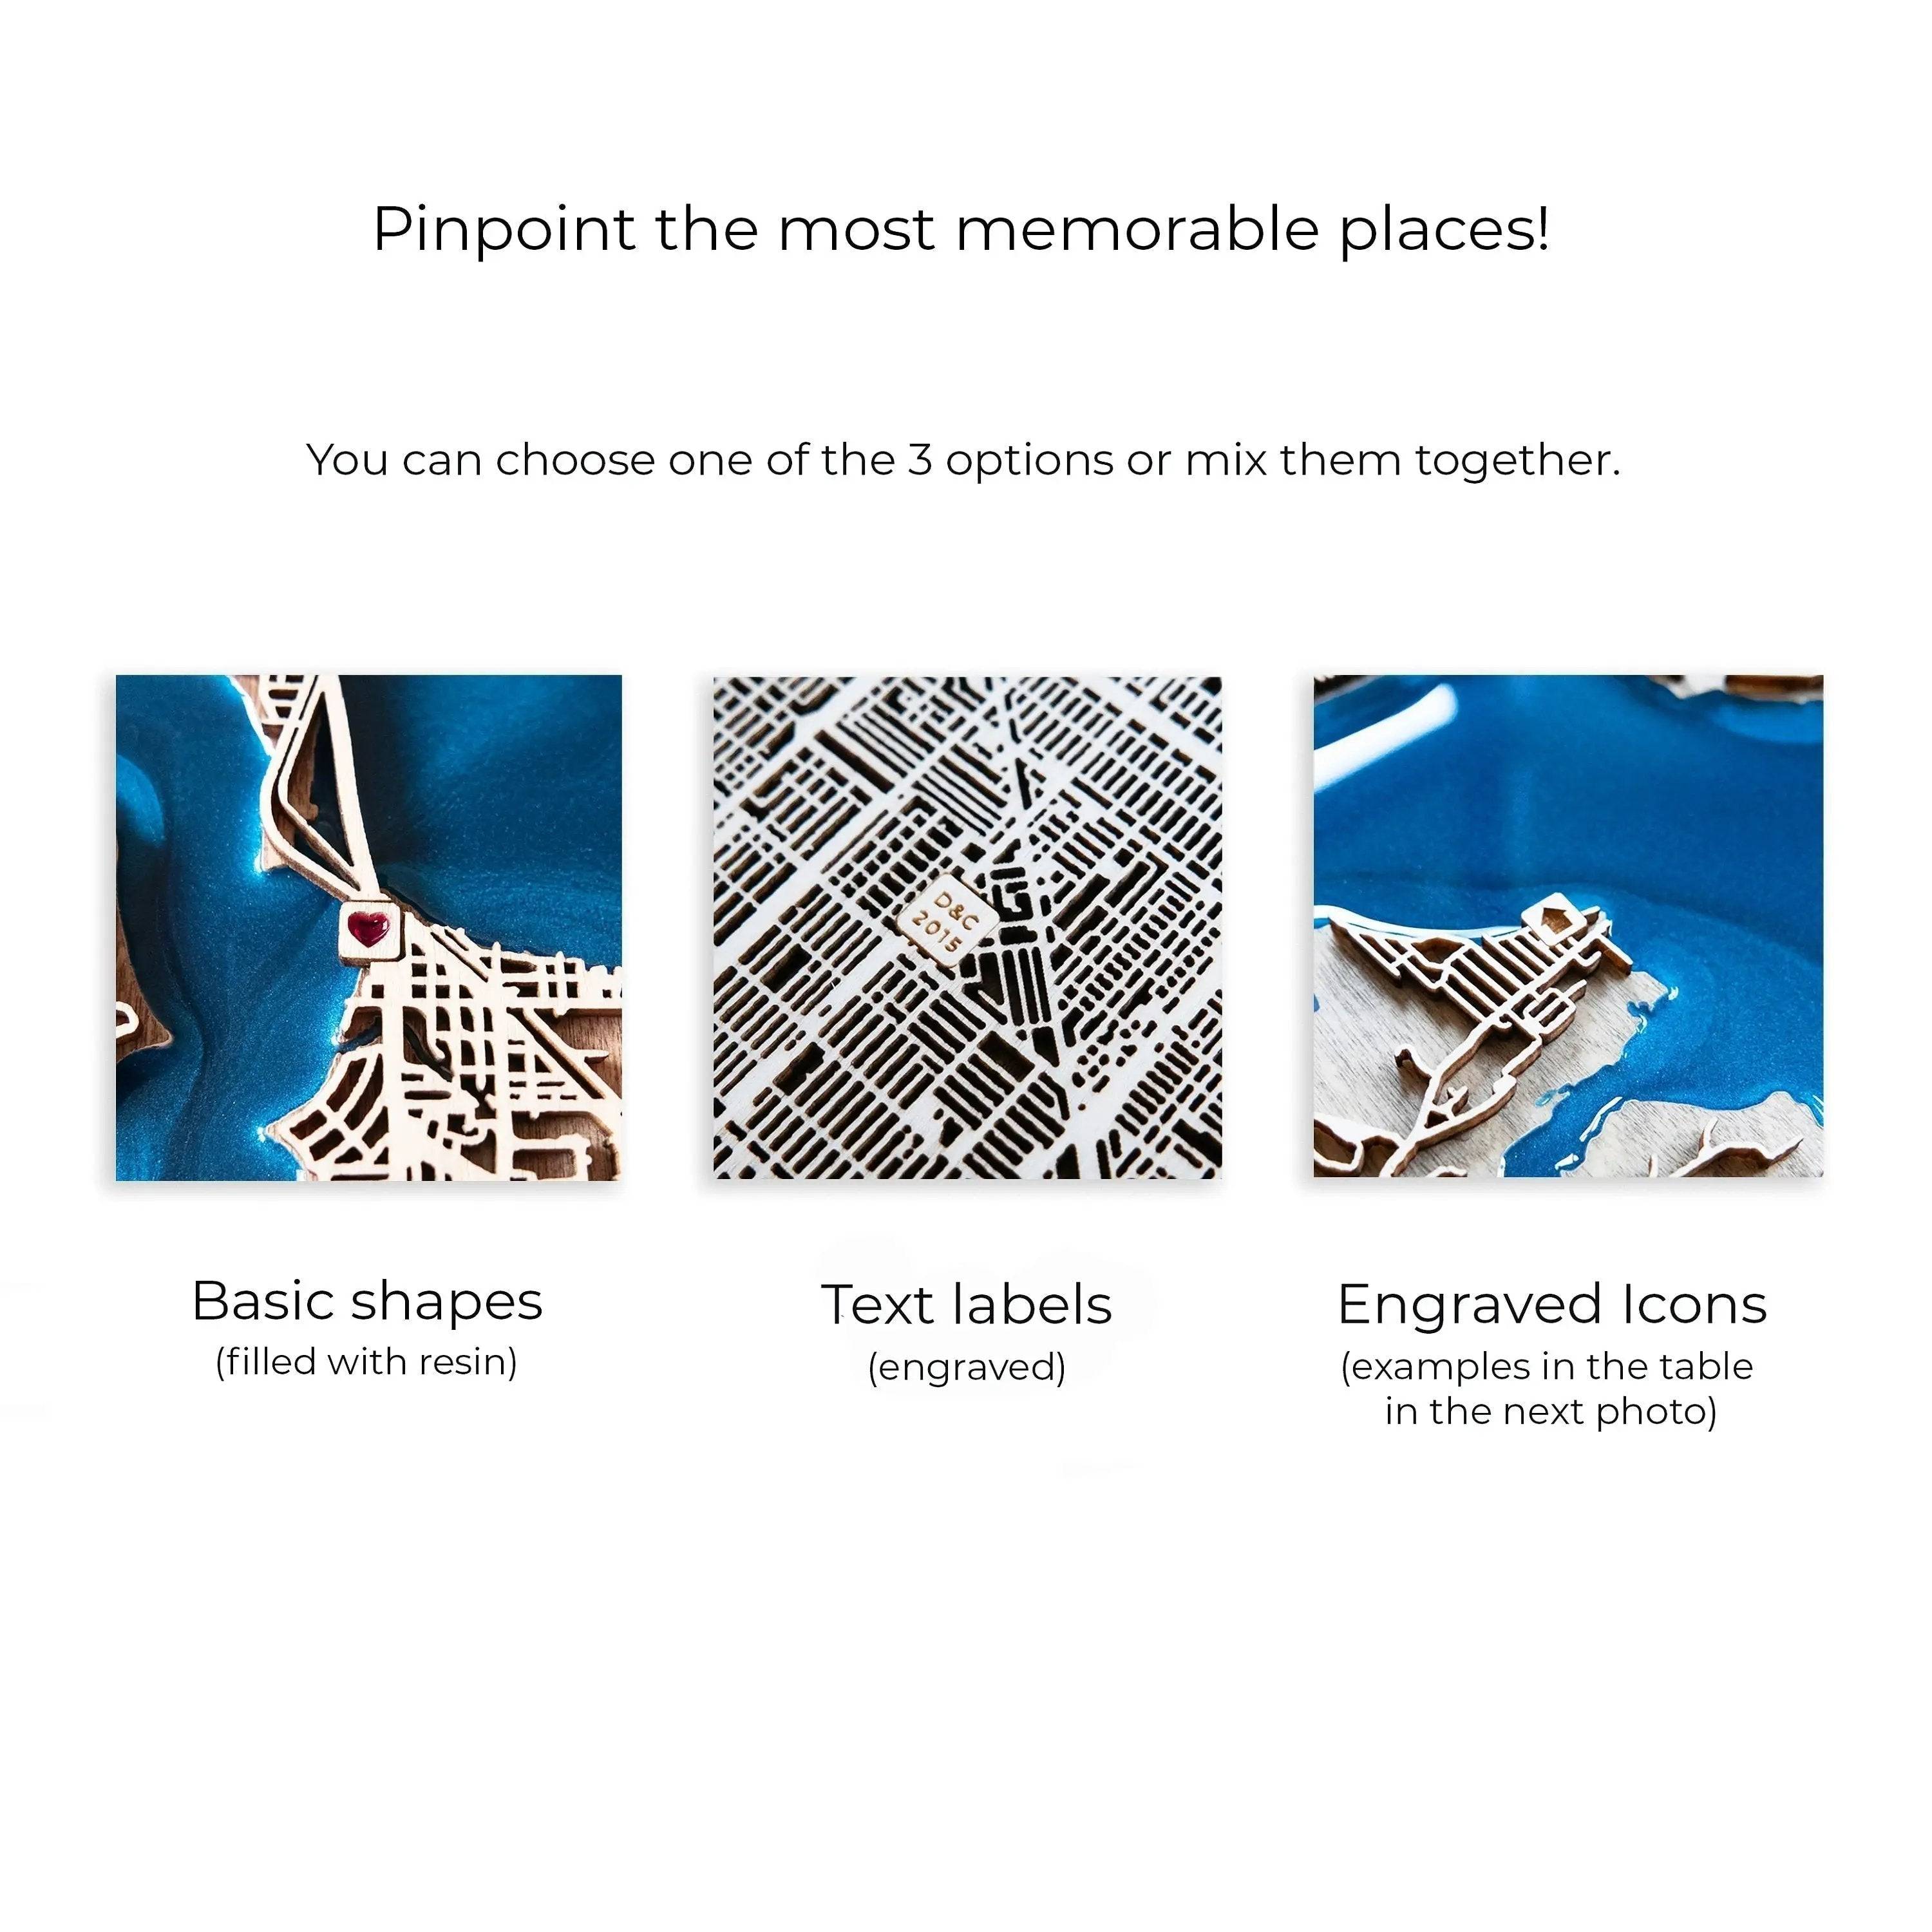 Pinpoint the most memorable places! You can choose basic shapes filed with resin, engraved short text or simple icons.